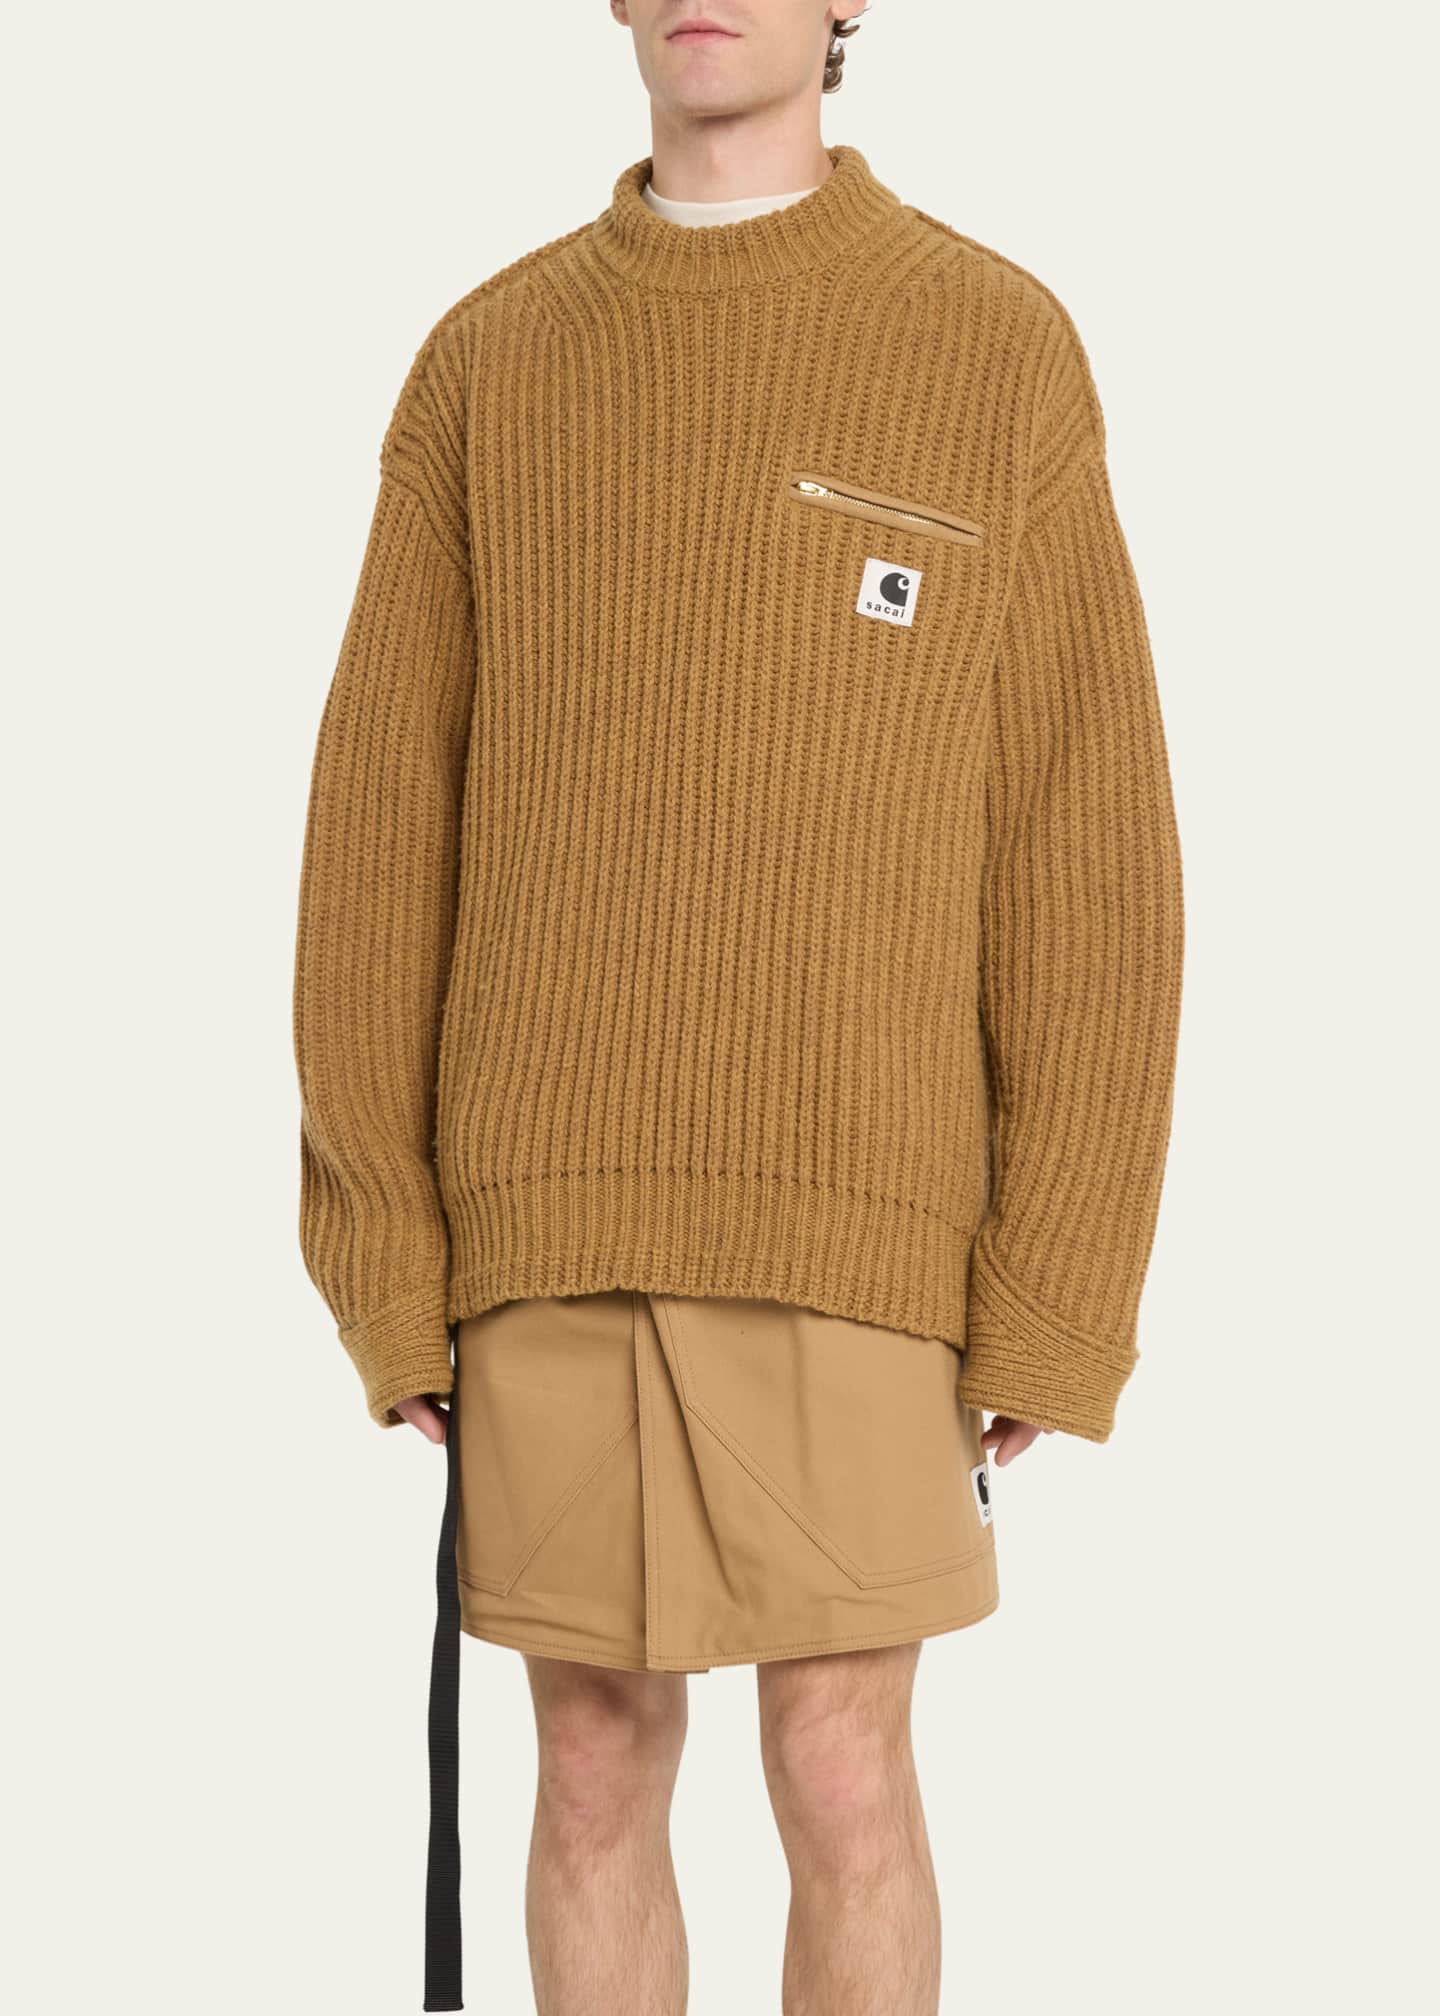 Carhartt WIP Knit Pullover Detroit   sacai Official Store